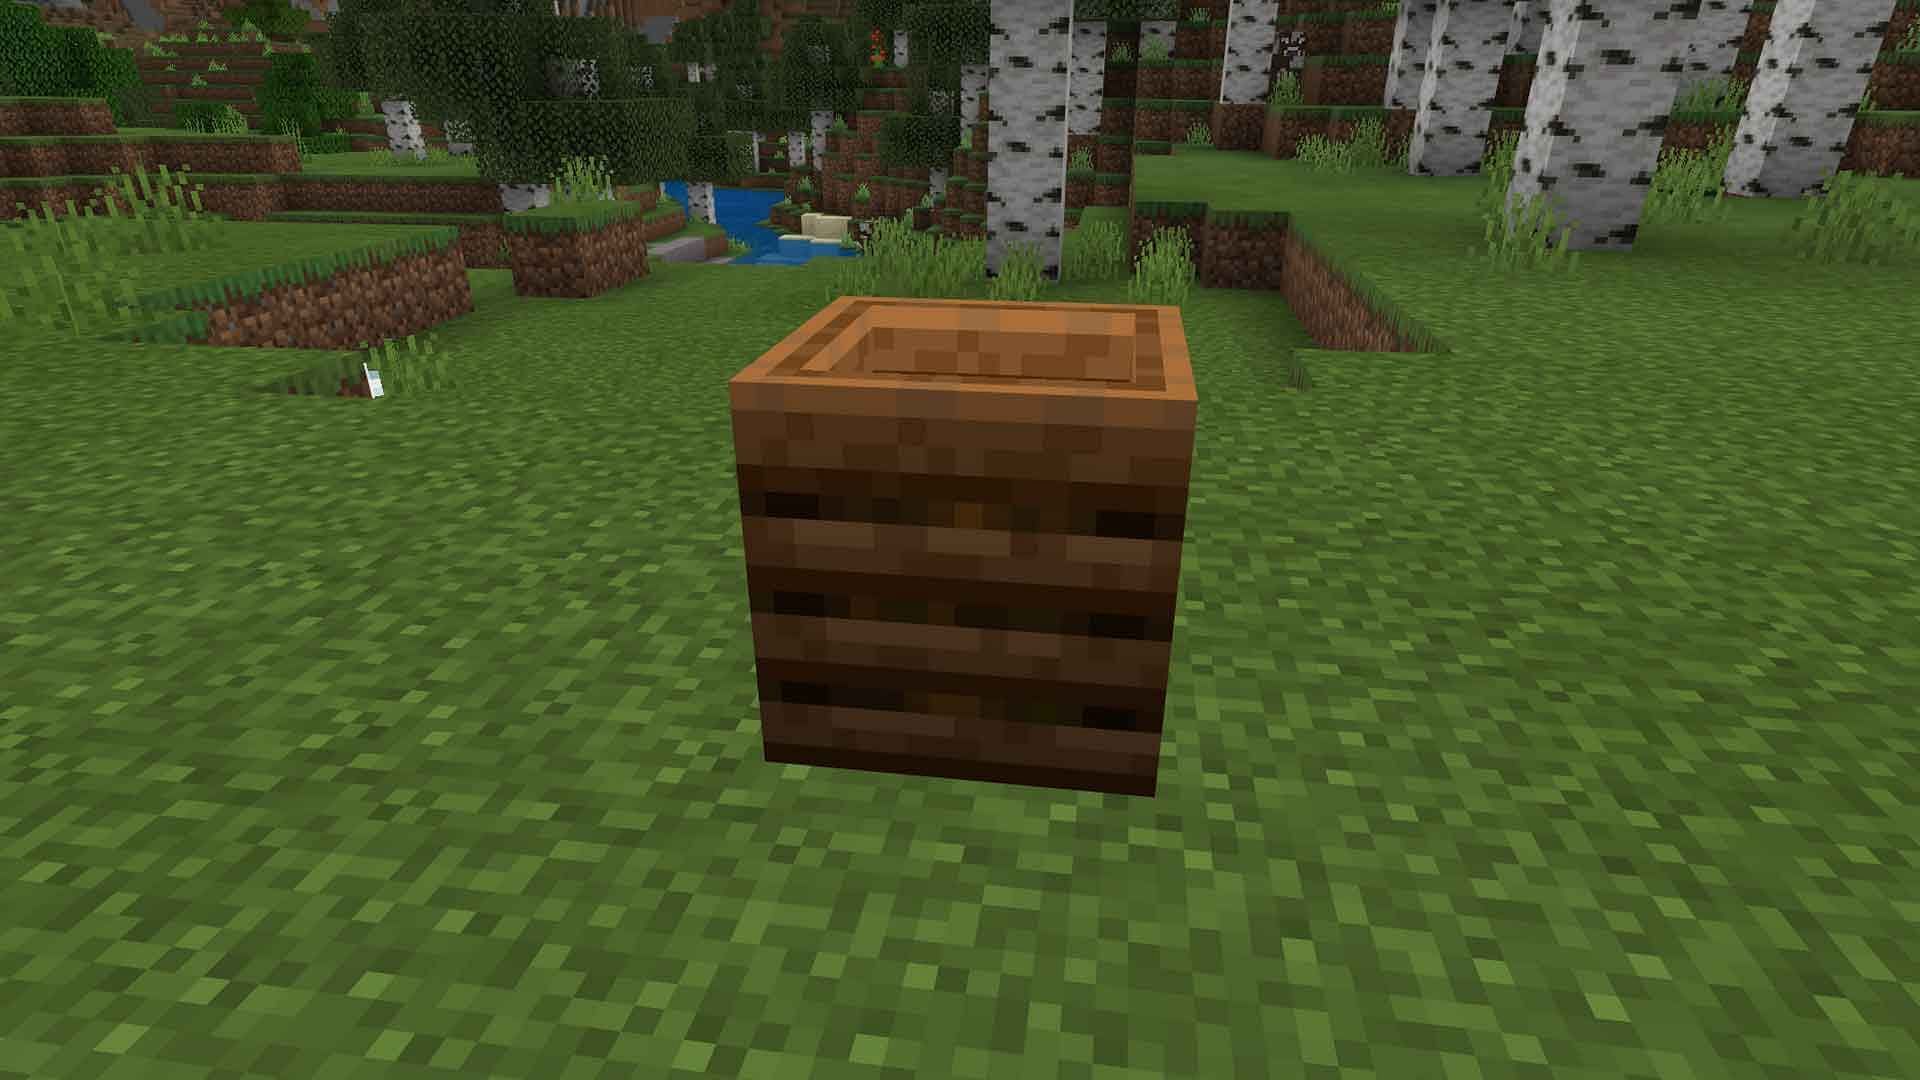 Composter is useful when it comes to bread (image via Minecraft)